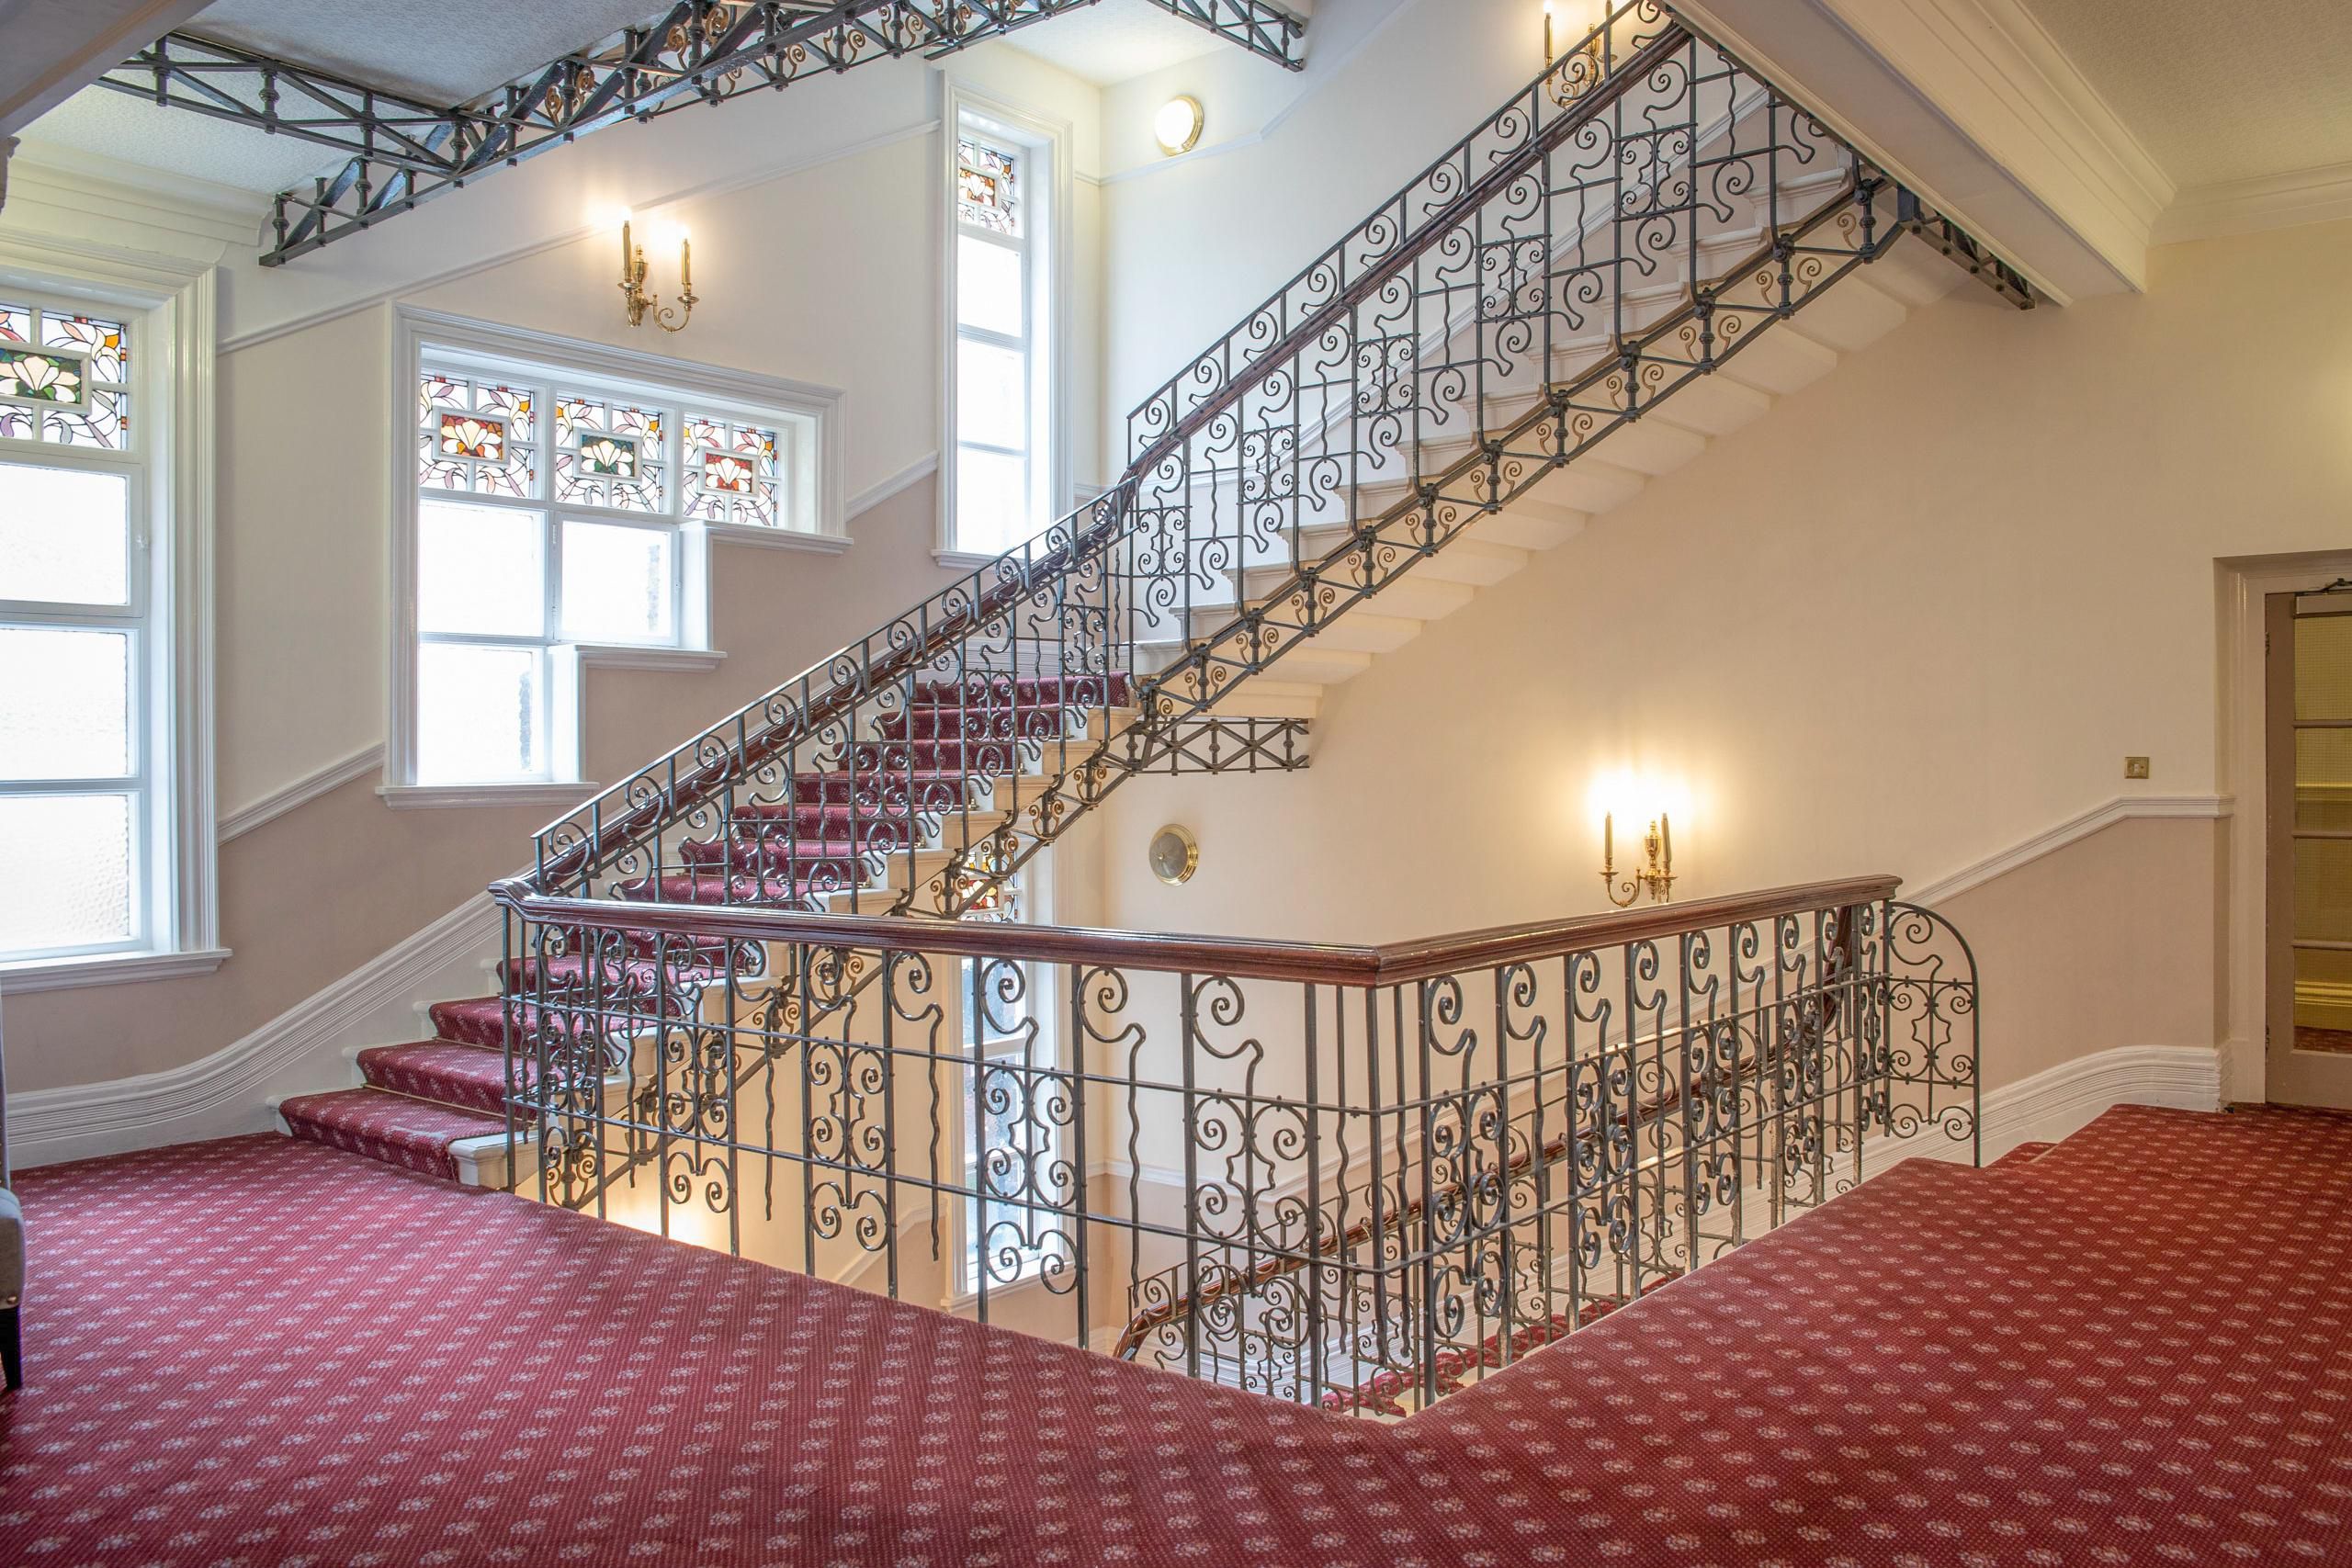 Elegant cast iron staircases at the hotel